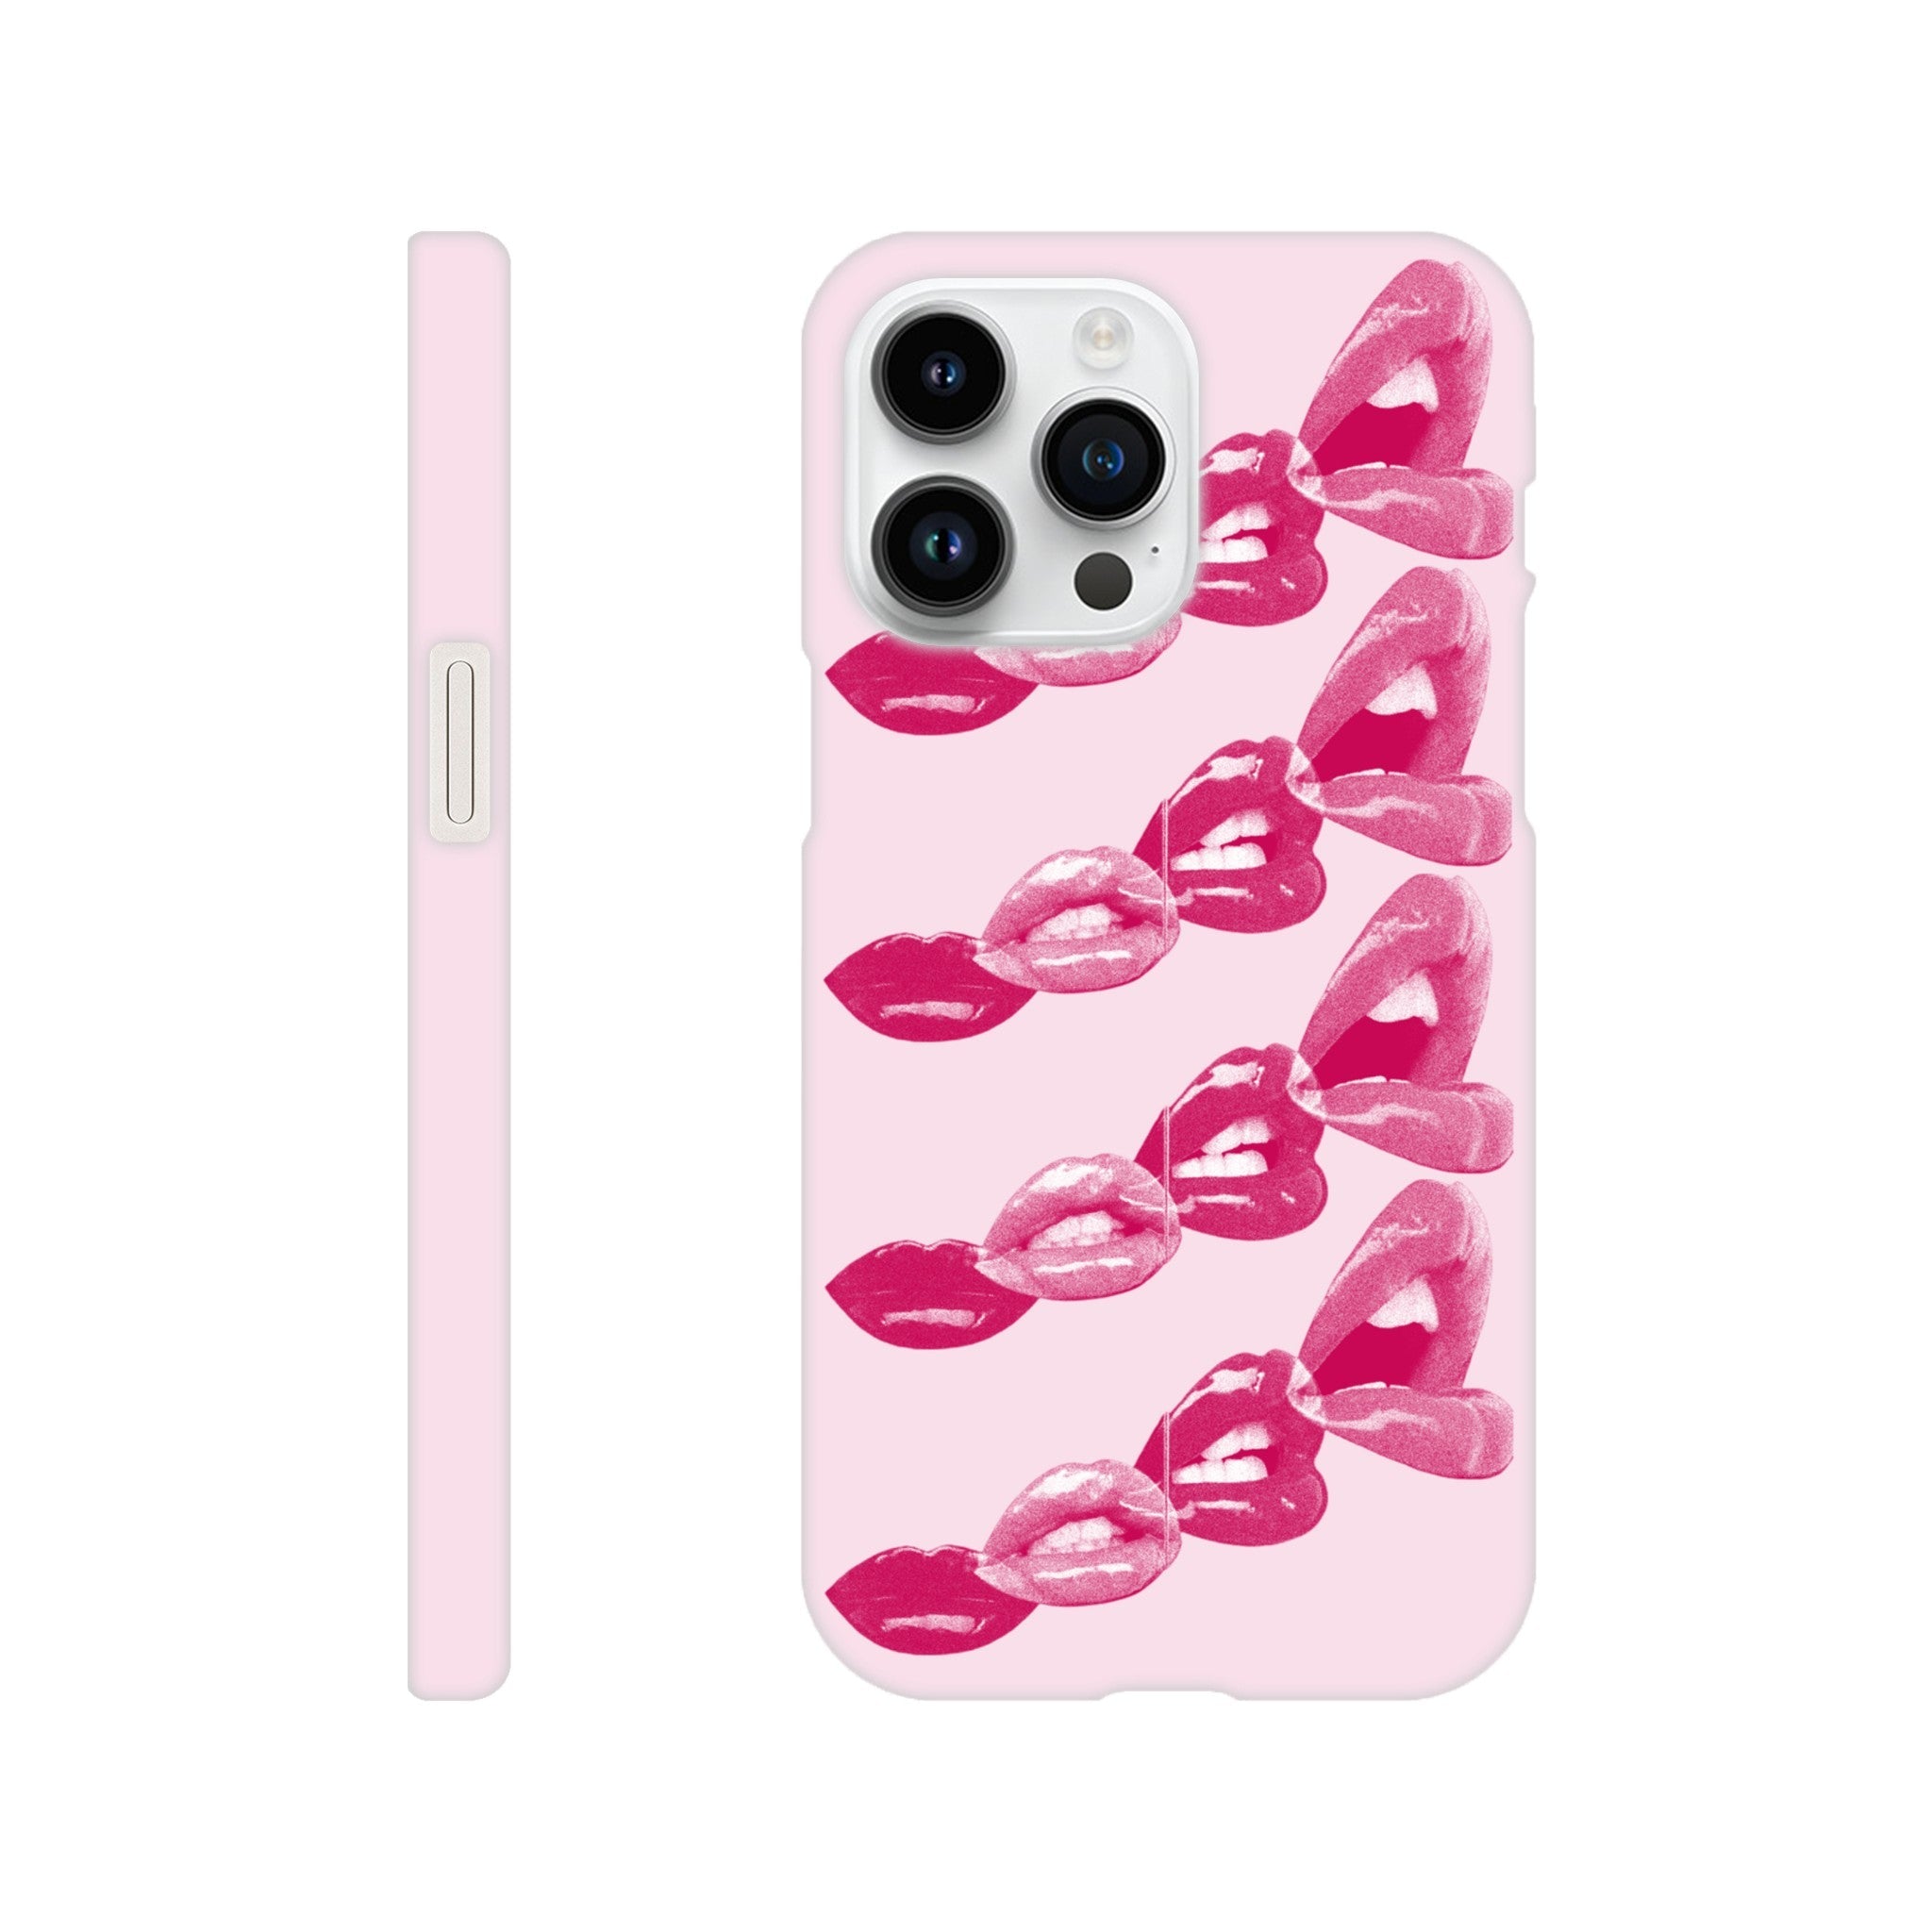 'Give Me a Kiss' phone case